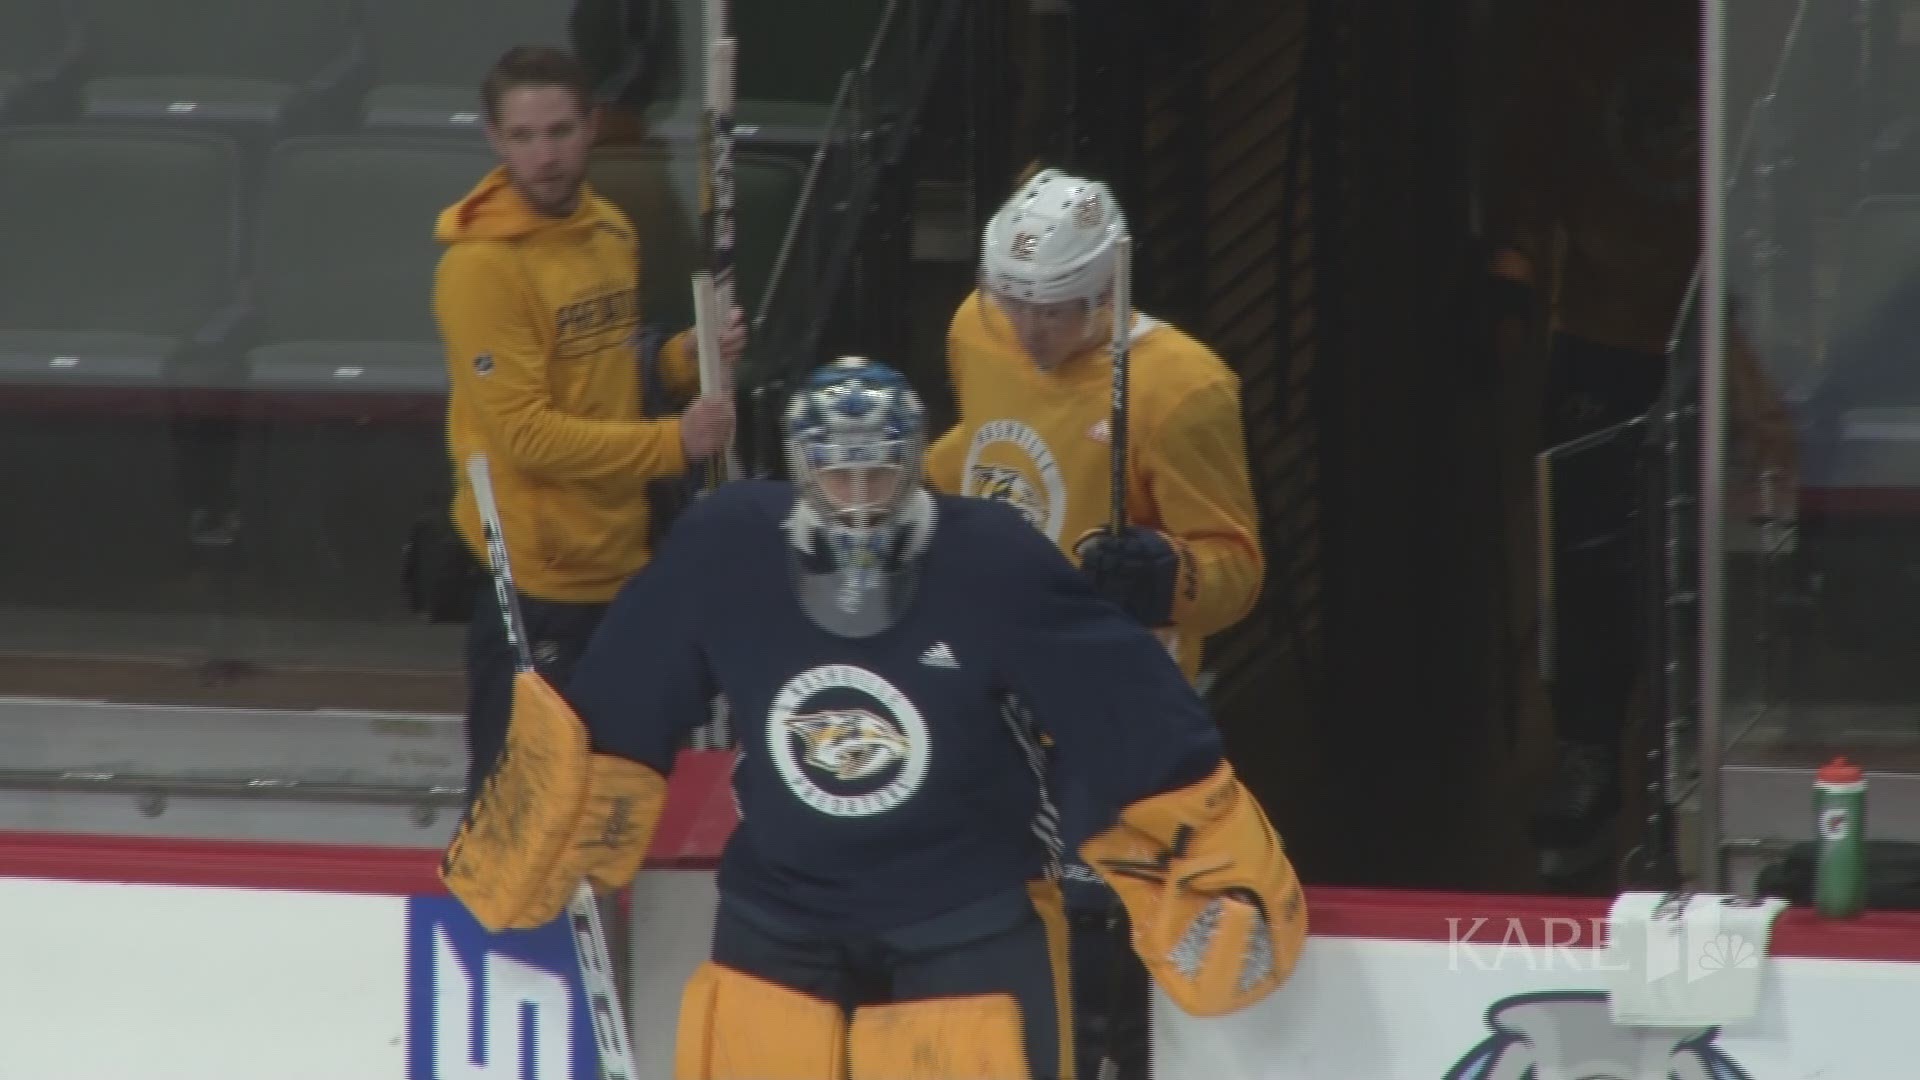 Former Gopher Rem Pitlick previews his NHL debut with the Predators.